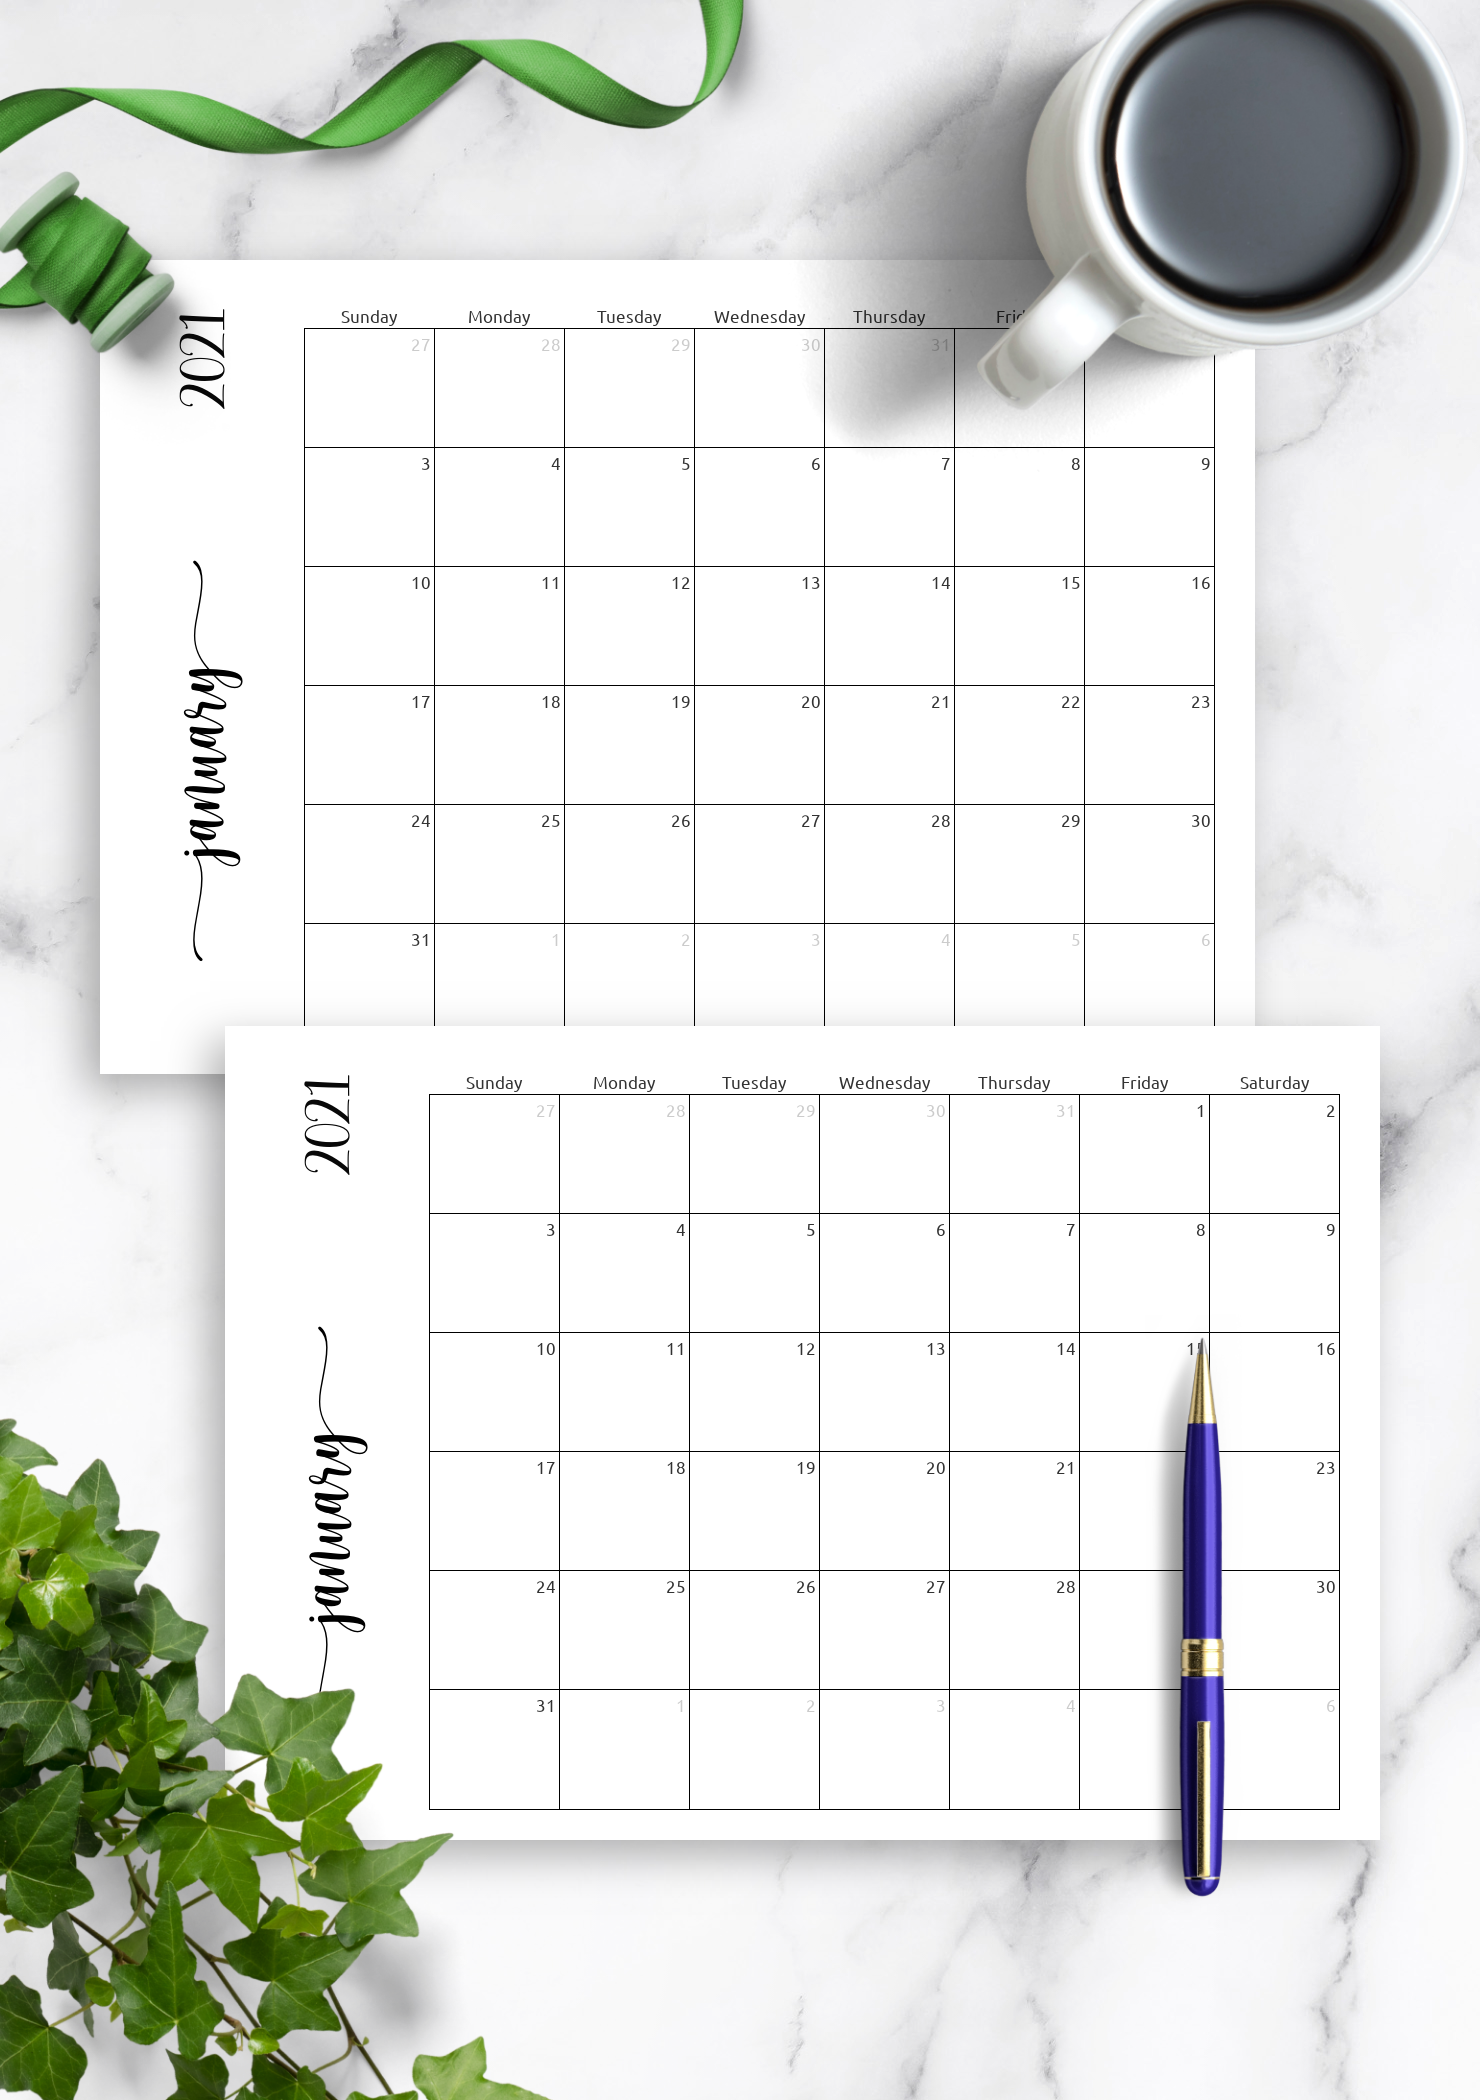 calendars you can edit online 7